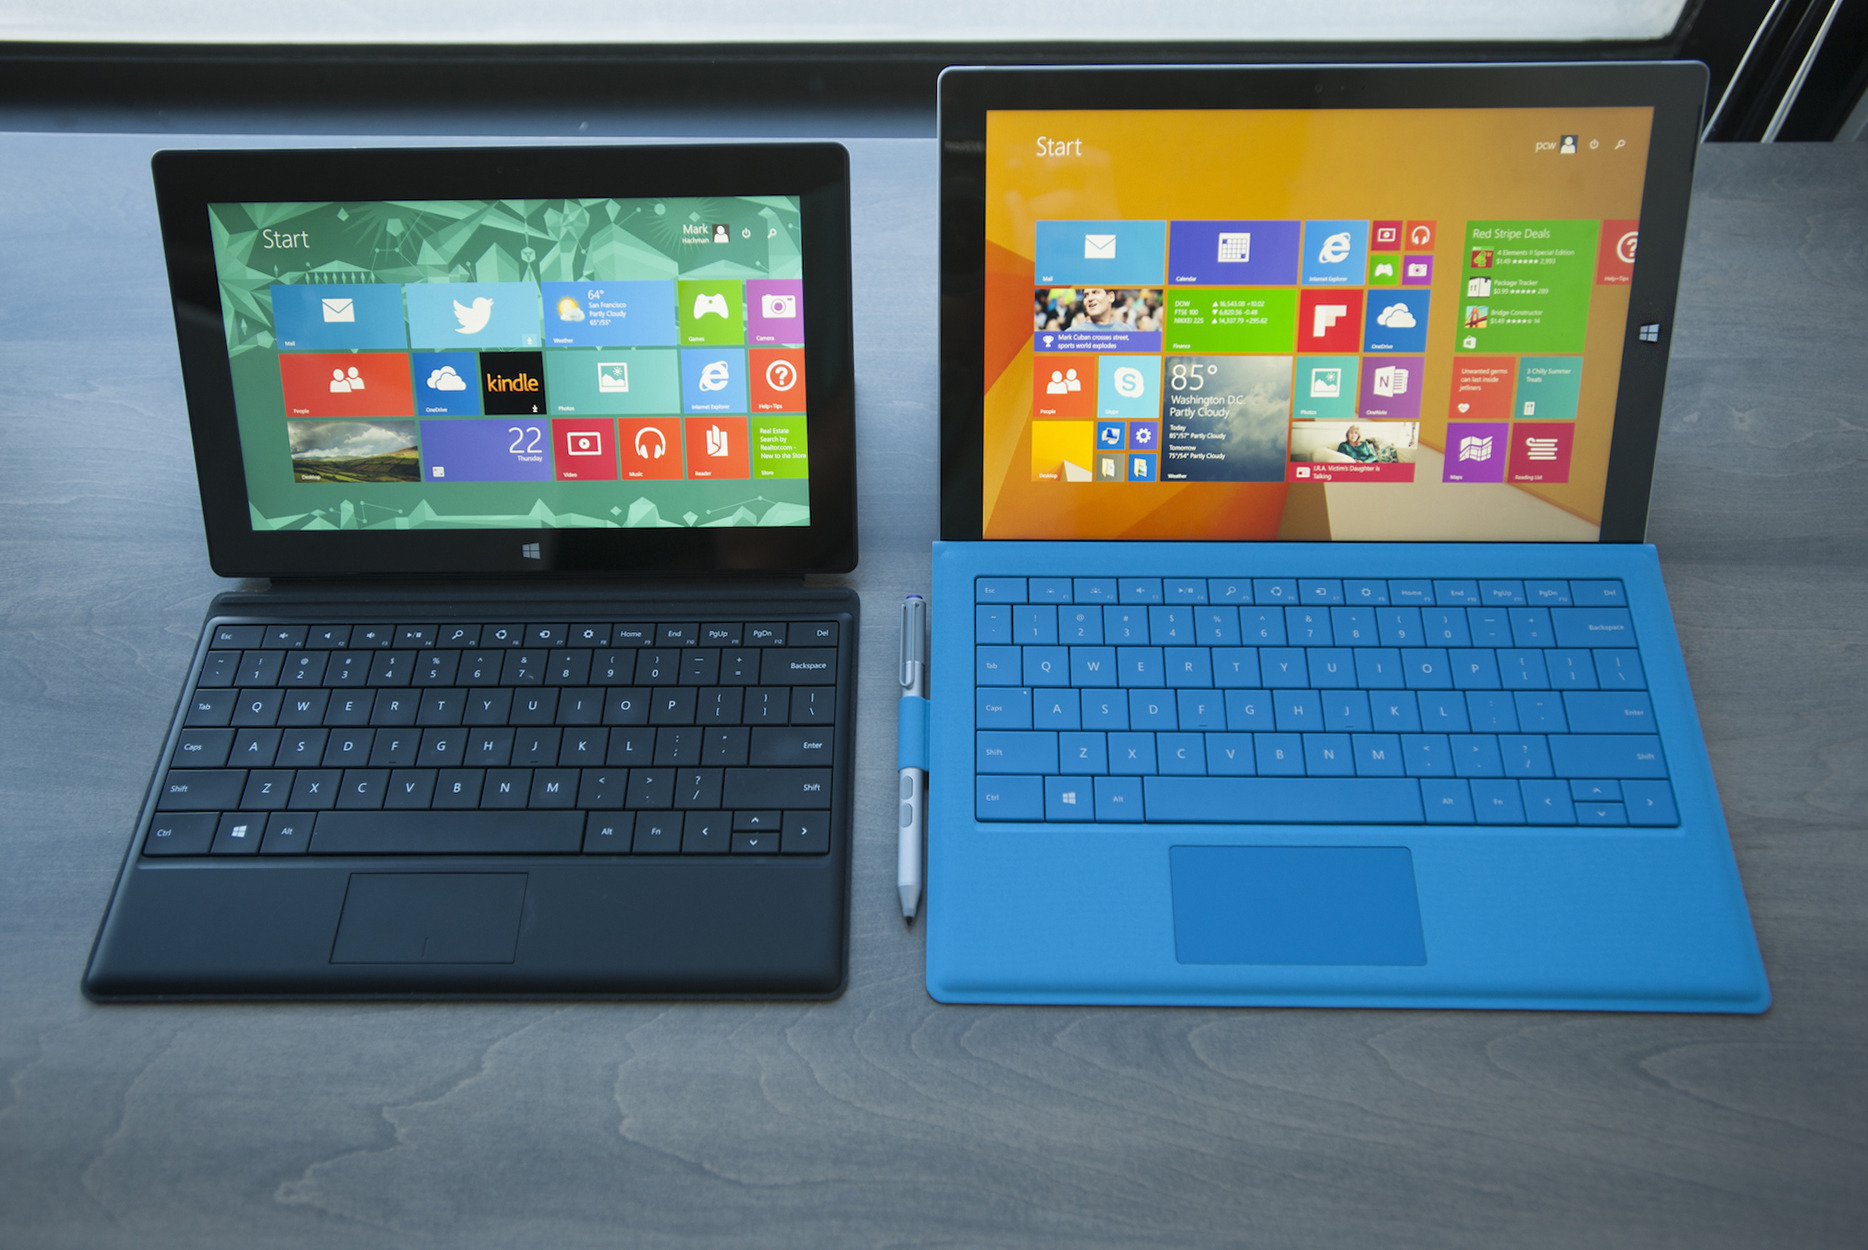 Microsoft Surface Pro 3: Primo video hands-on online